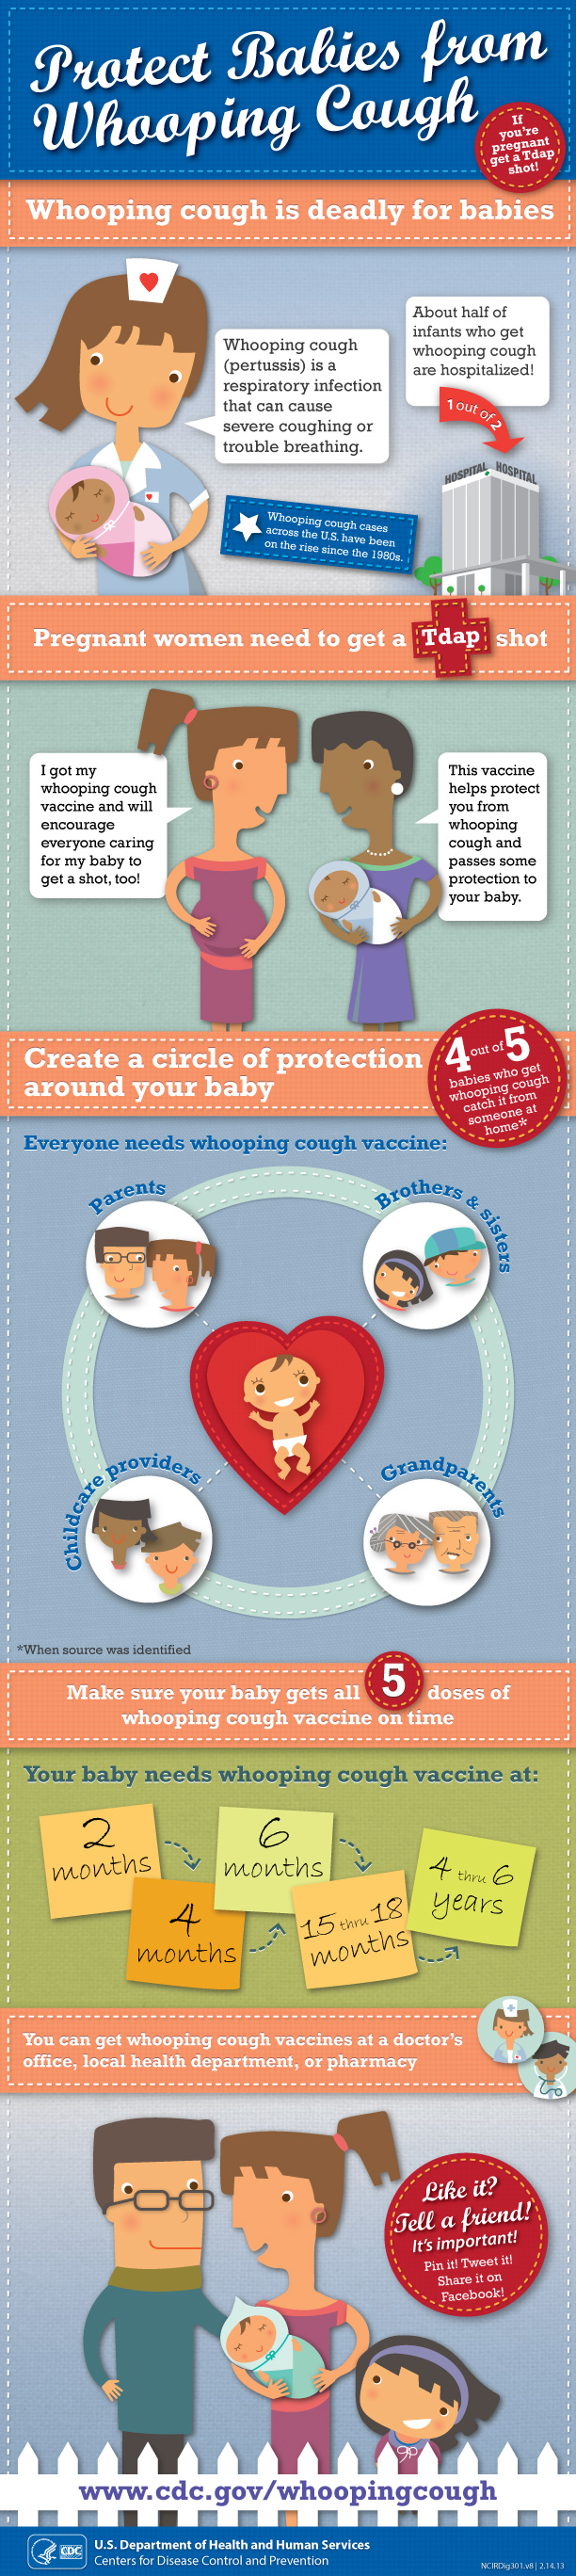 protect-babies-from-whooping-cough